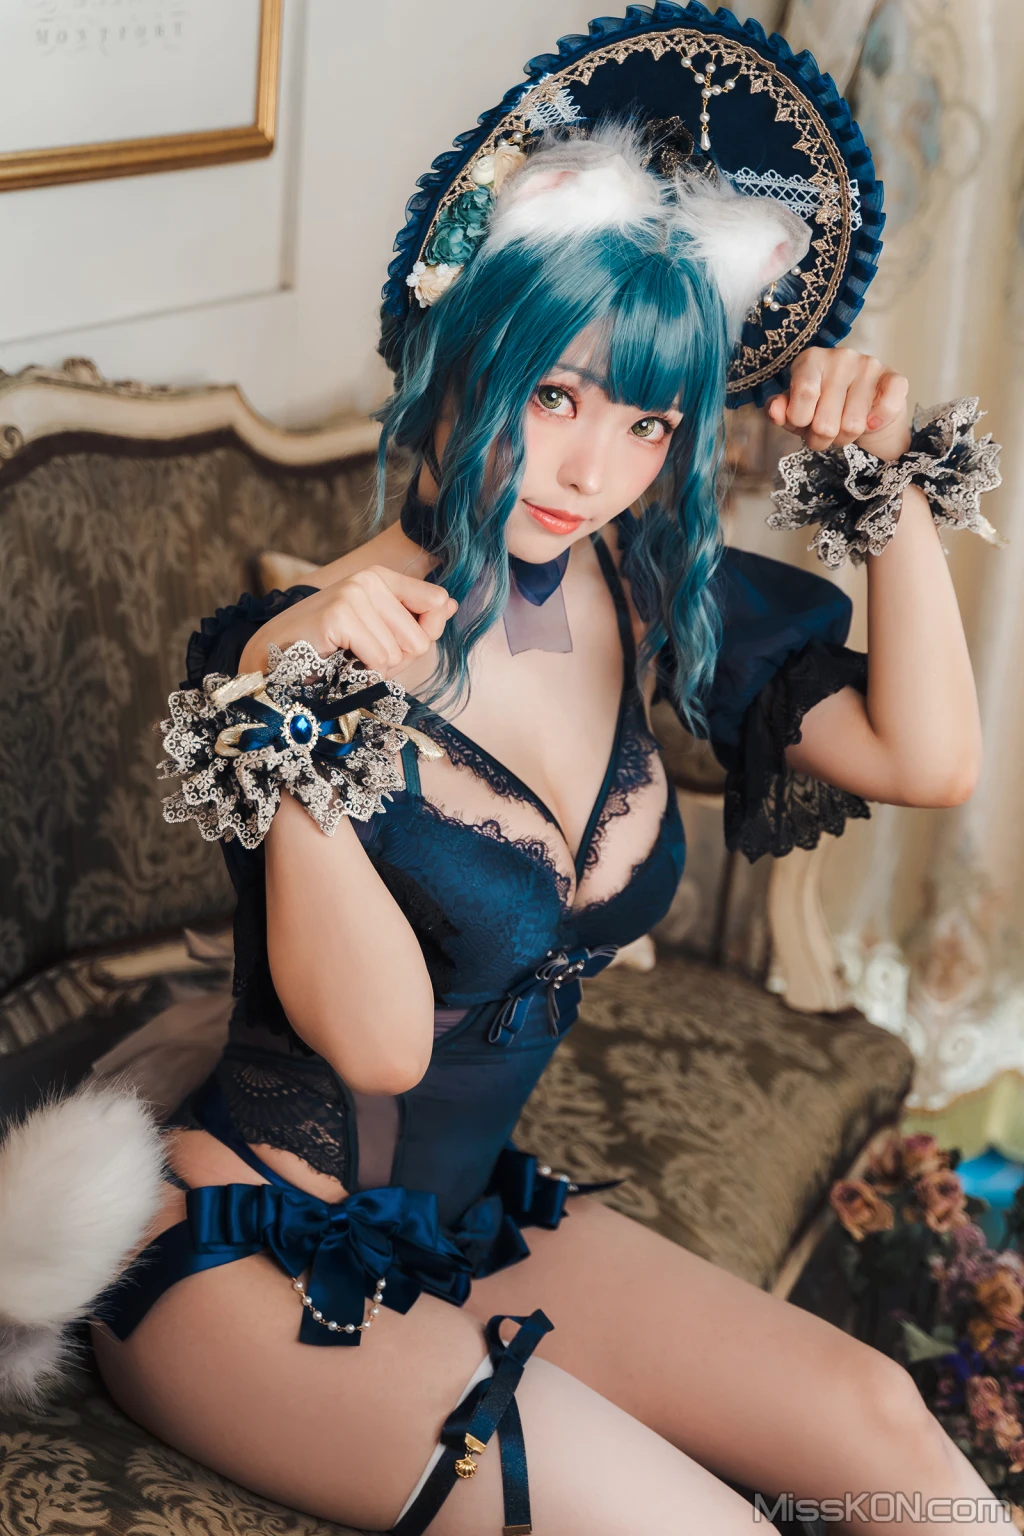 Coser@Ely_eee (ElyEE子): Scottish Fold Cat Doll (摺耳貓少女人形) (60 photos)